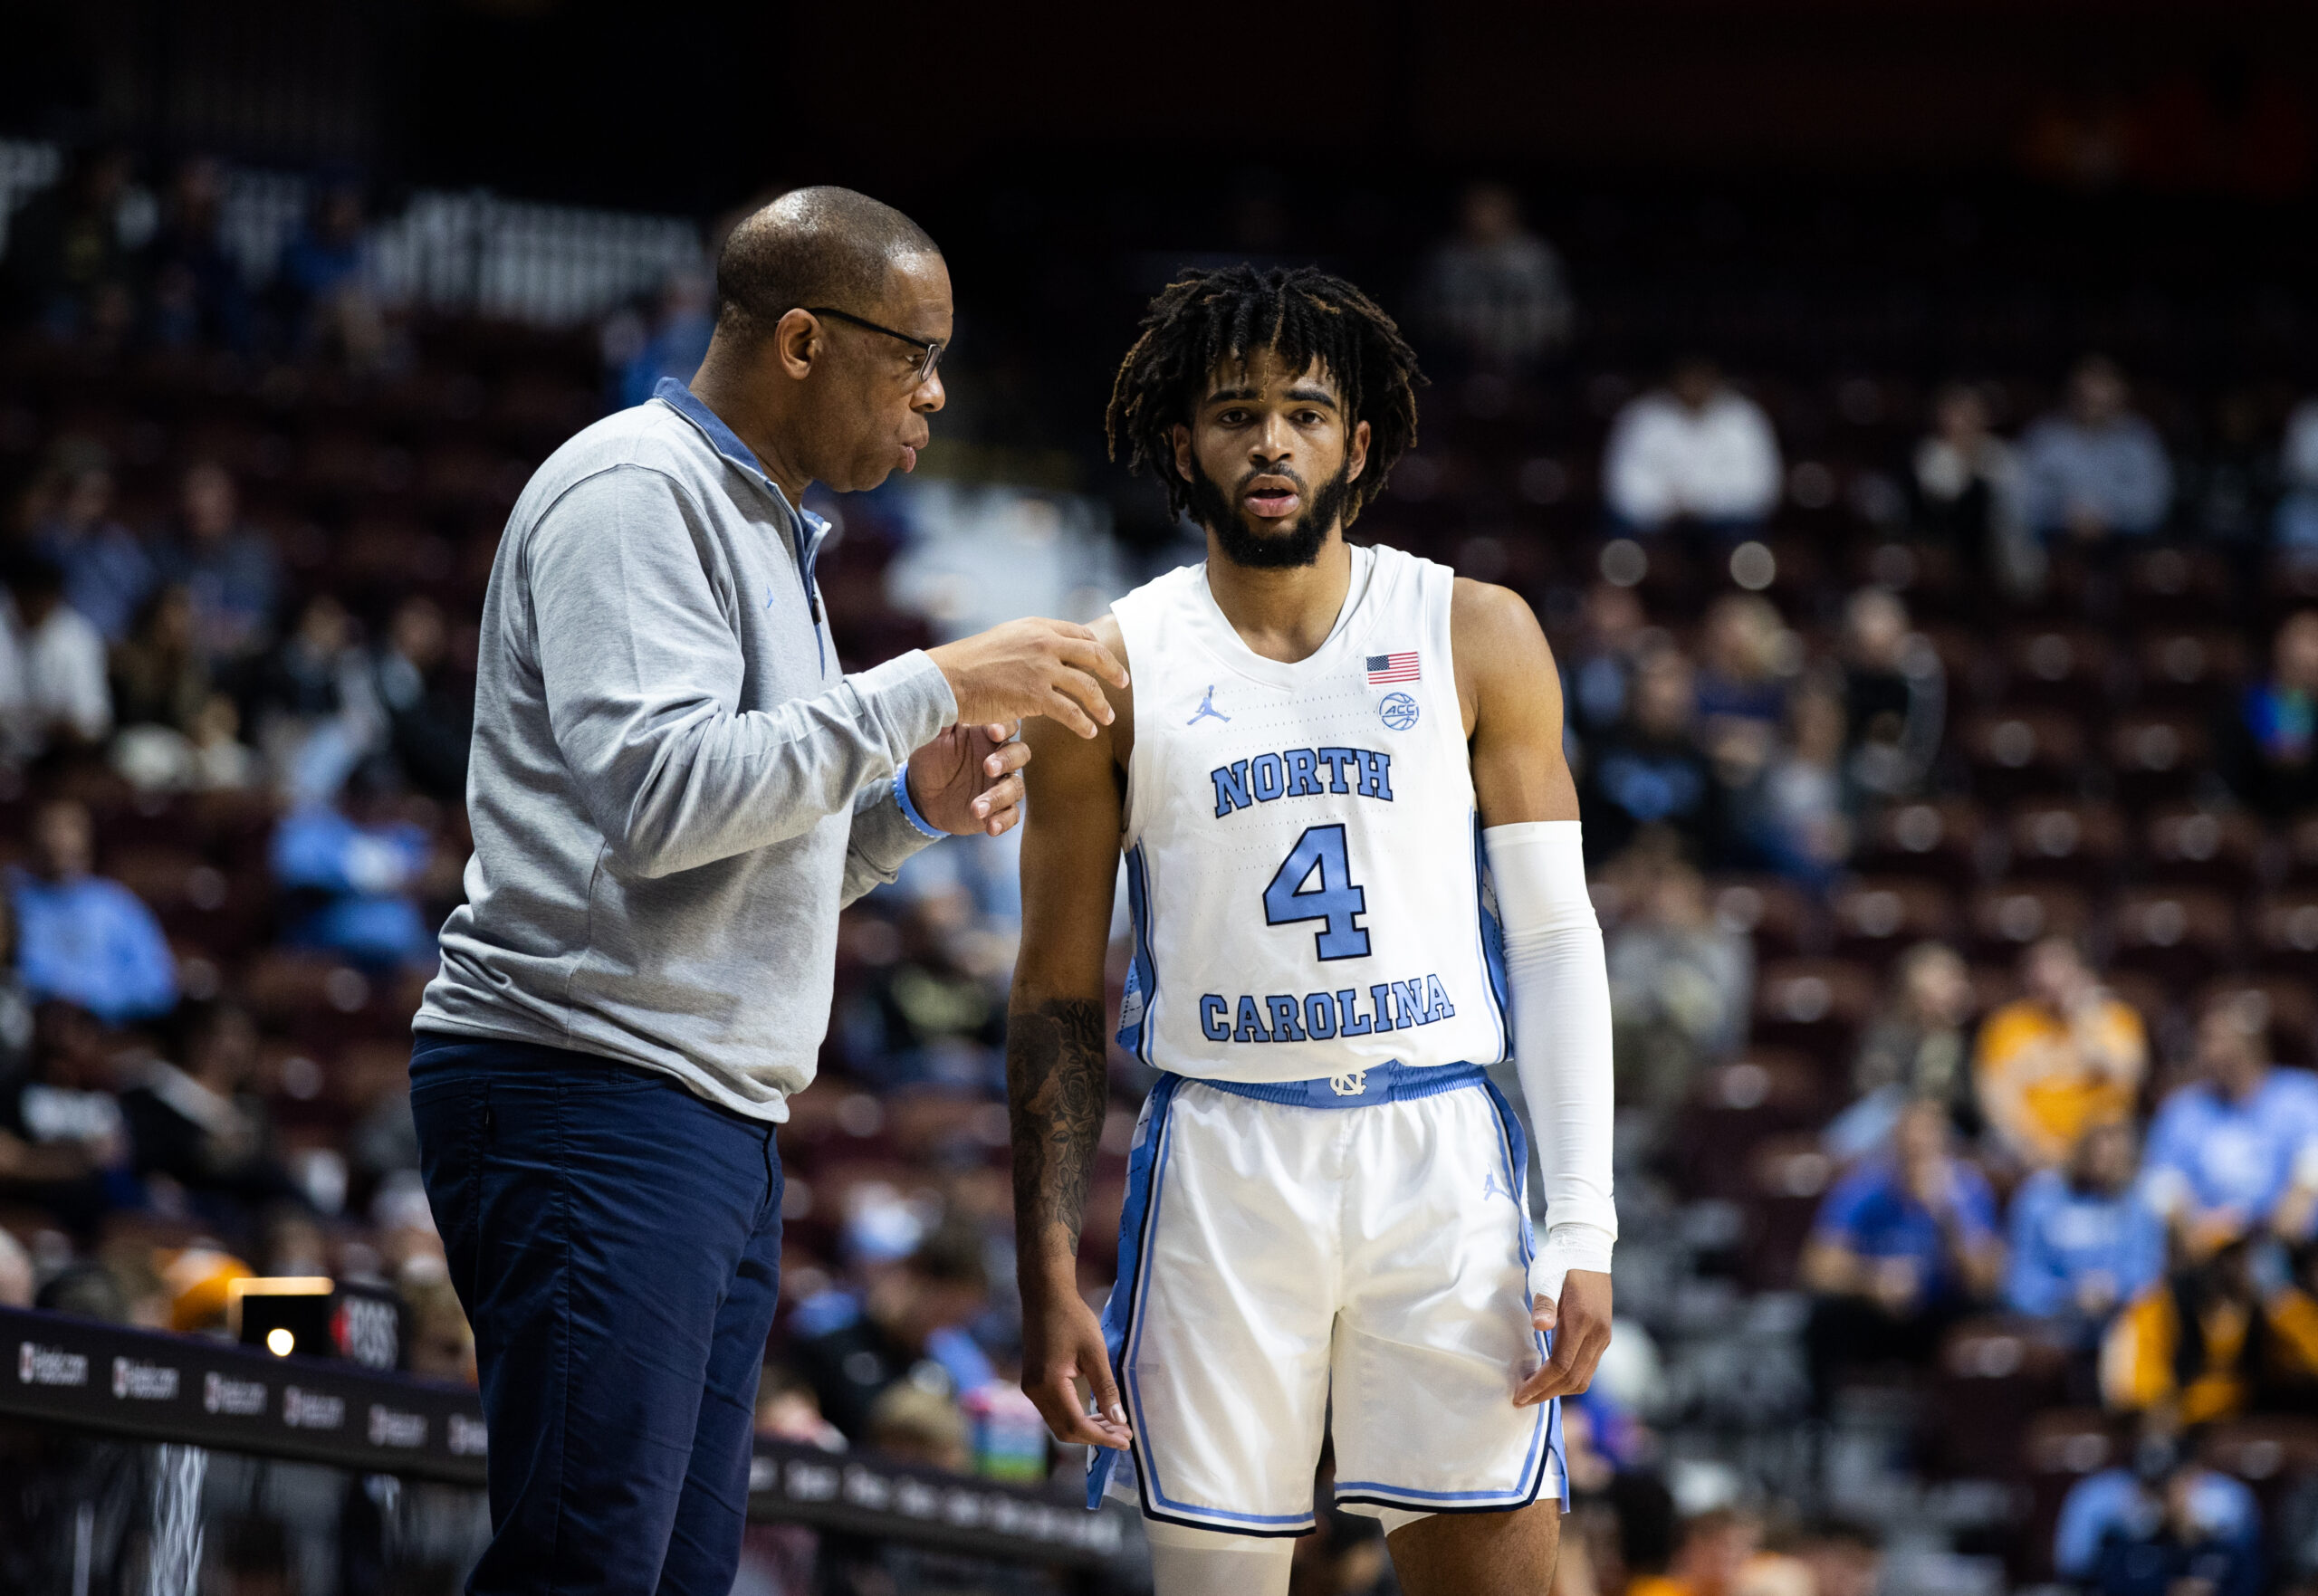 The UNC Tar Heels were the preseason No. 1 team and now face becoming the only preseason No. 1 to not make NCAA tournament since 1985.